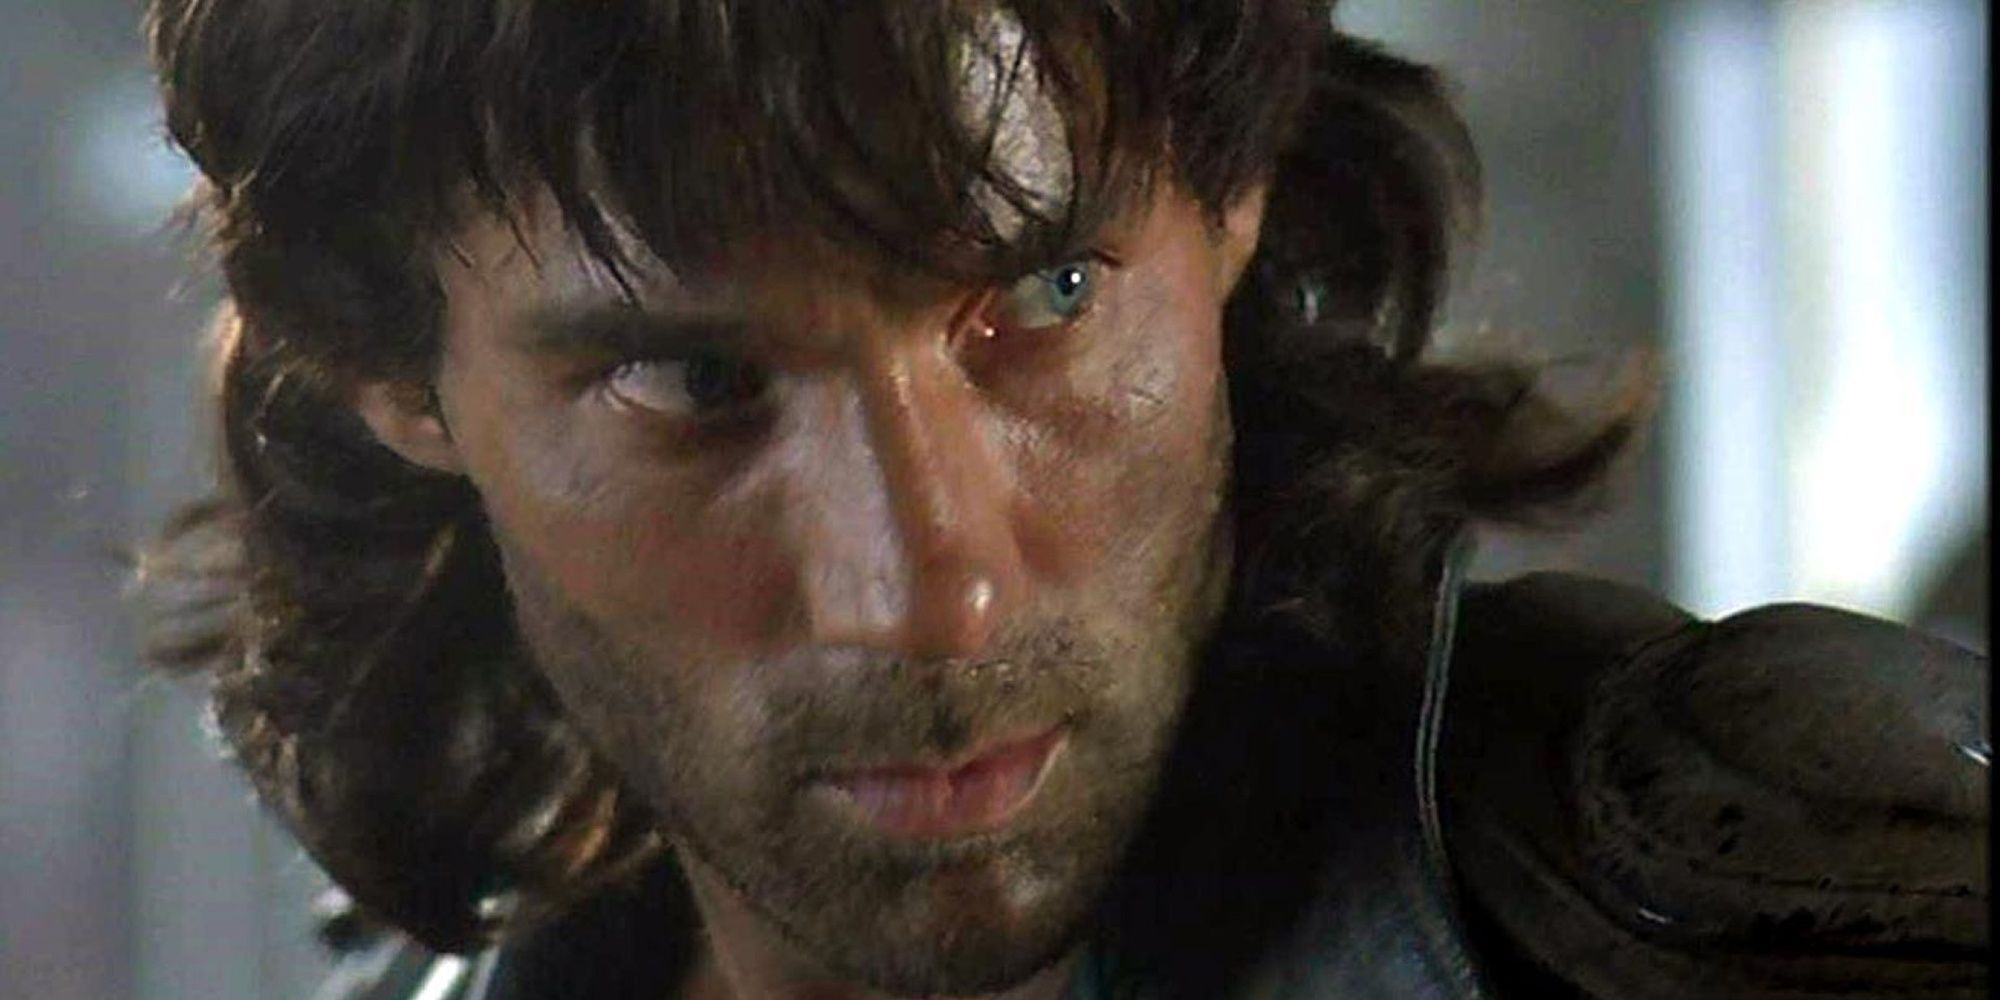 Gary Daniels as Kenshiro from Fist of the North Star (1995)